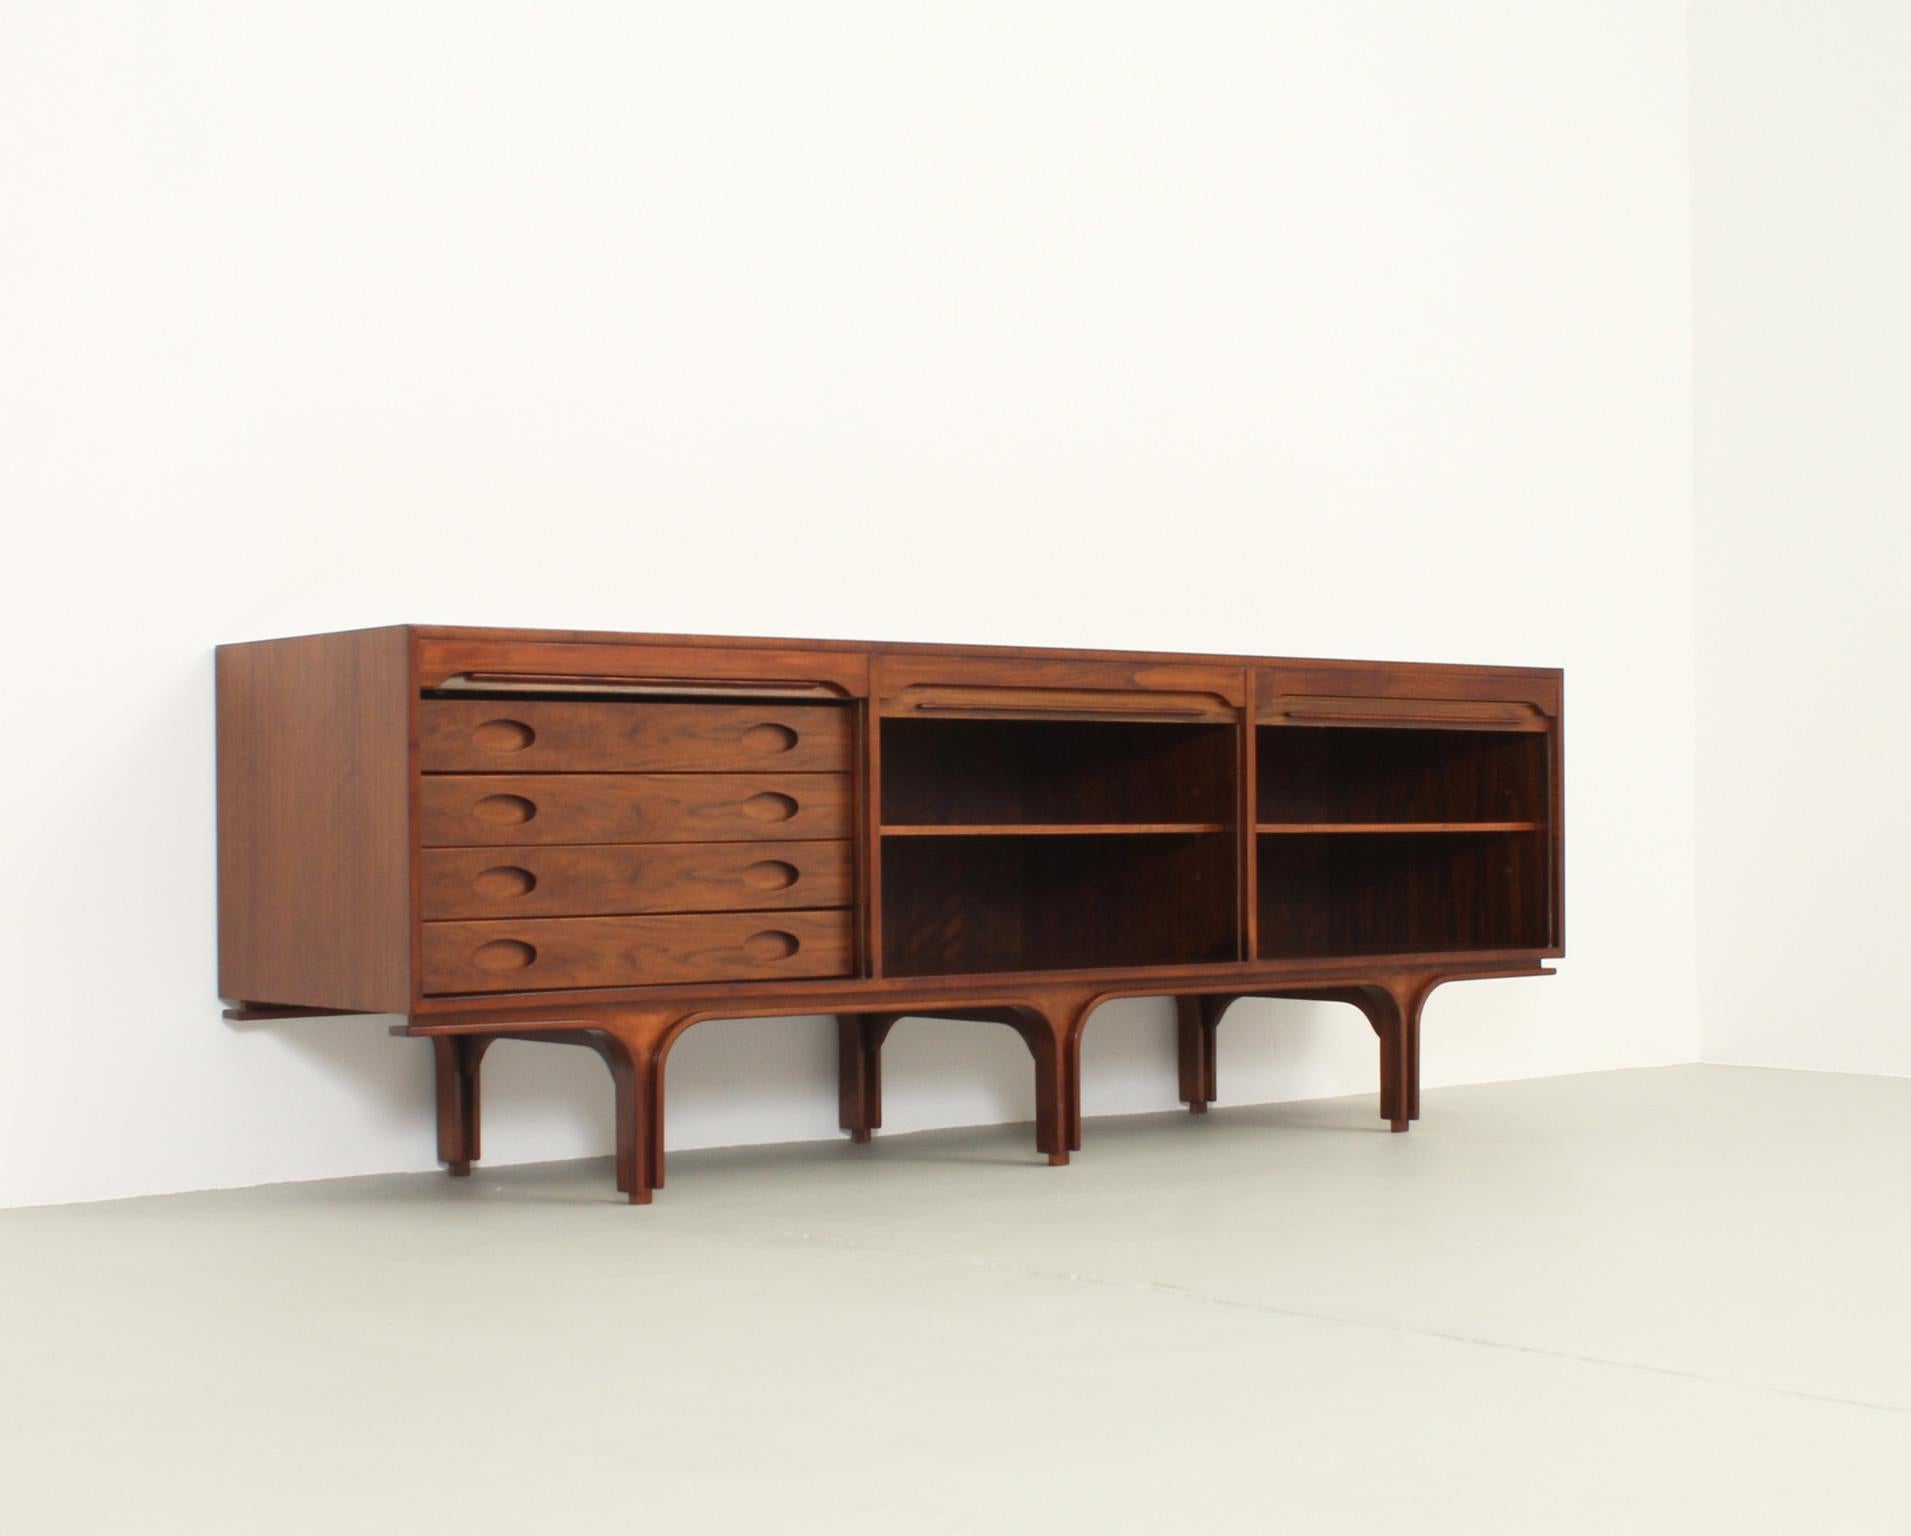 Sideboard with tambour doors designed in 1957 by Gianfranco Frattini for Bernini, Italy. Walnut wood. Four drawers and two spaces with shelves. This sideboard can be matched with another smaller one.